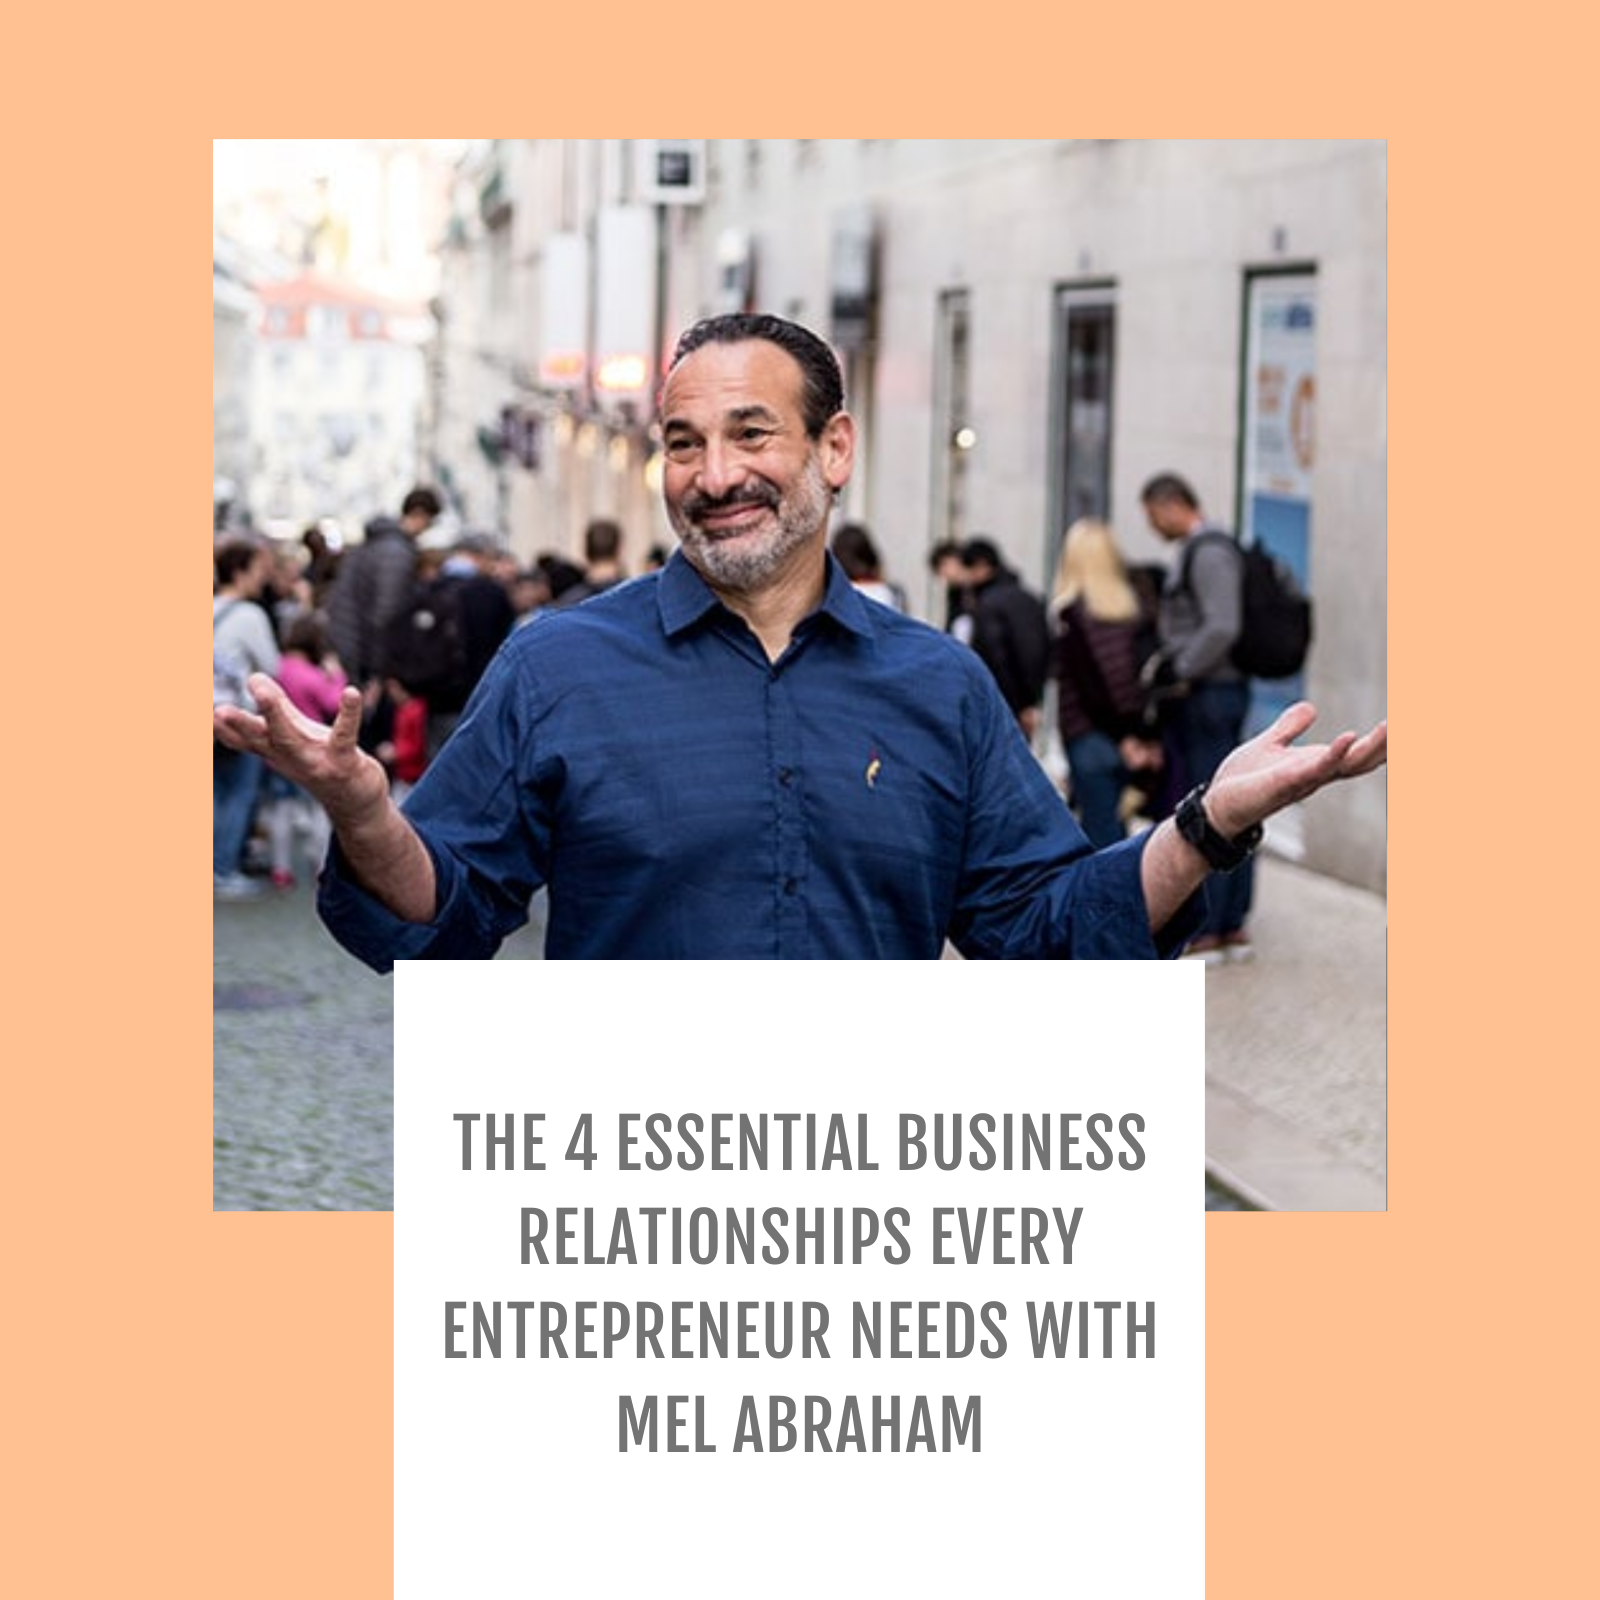 Episode #034: The 4 Essential Business Relationships Every Entrepreneur Needs With Mel Abraham